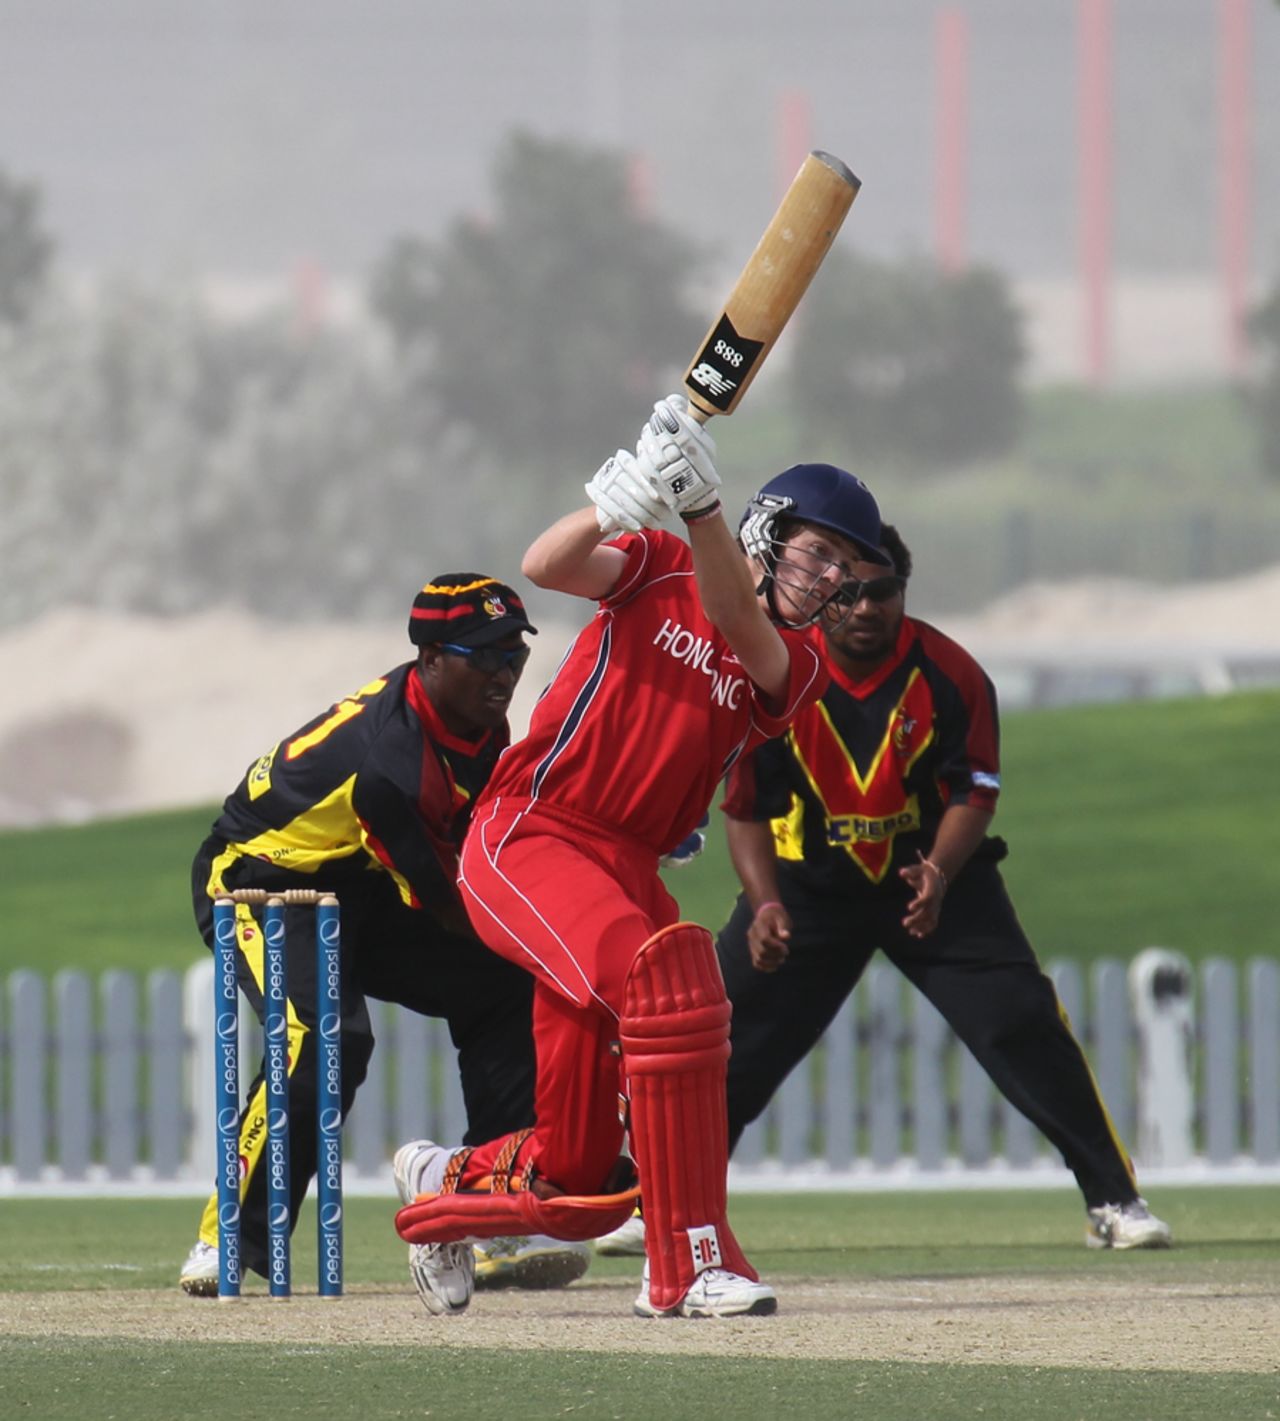 Max Tucker drives against PNG in the 3rd/4th Play-off match at the ICC WCL2 in Dubai on 15th April 2011